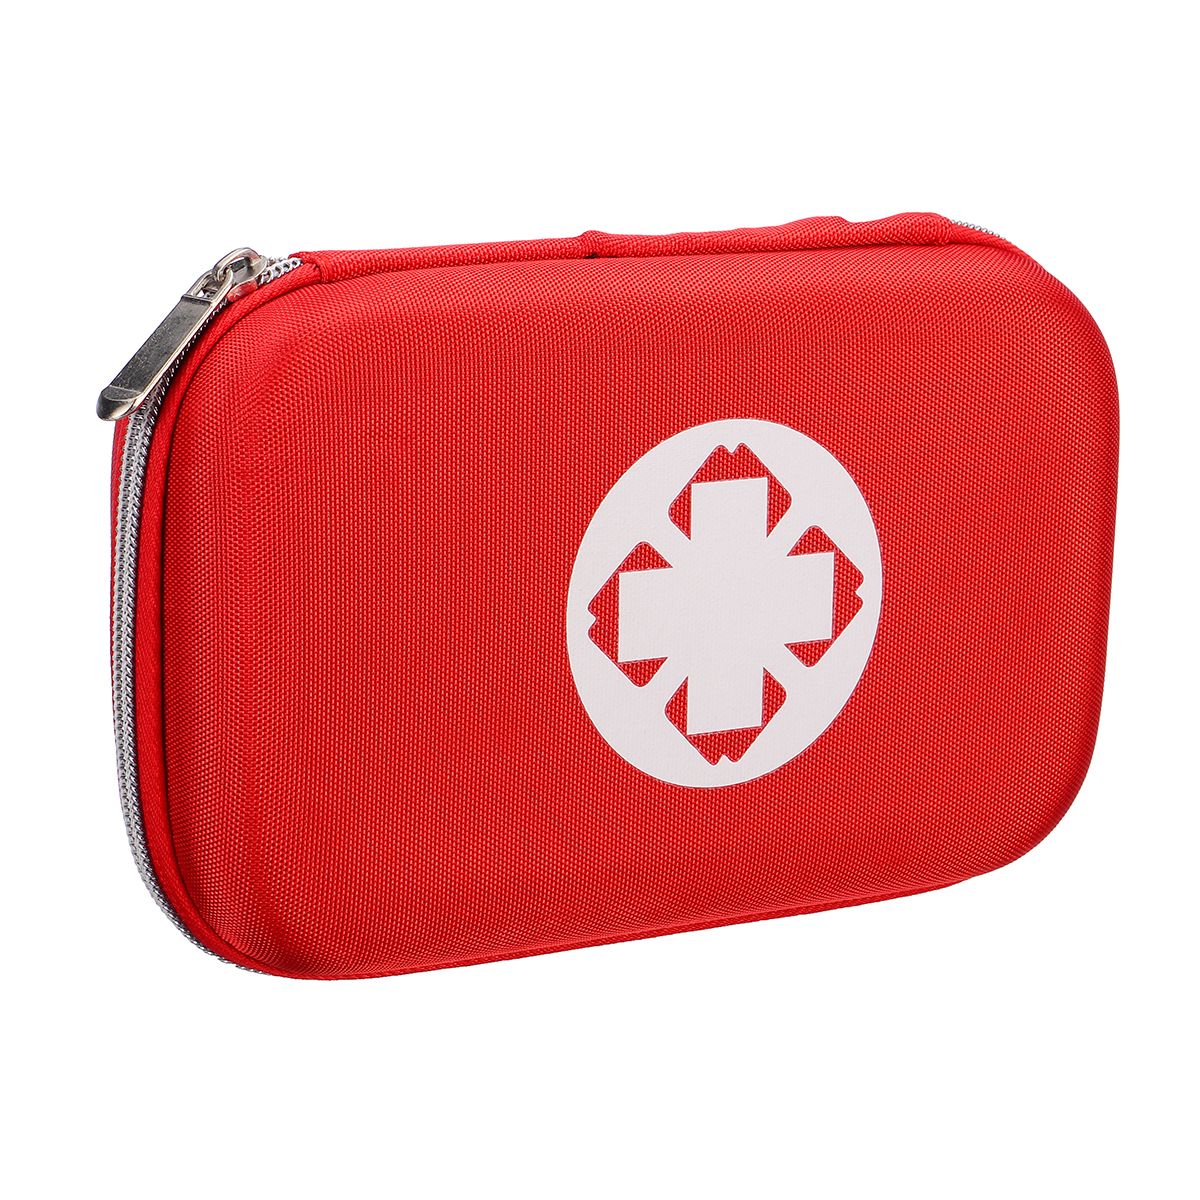 145Pcs-Upgraded-Outdoor--Indoor-Emergency-Survival-First-Aid-Kit-Survival-Gear-for-Home-Office-Car-B-1543194